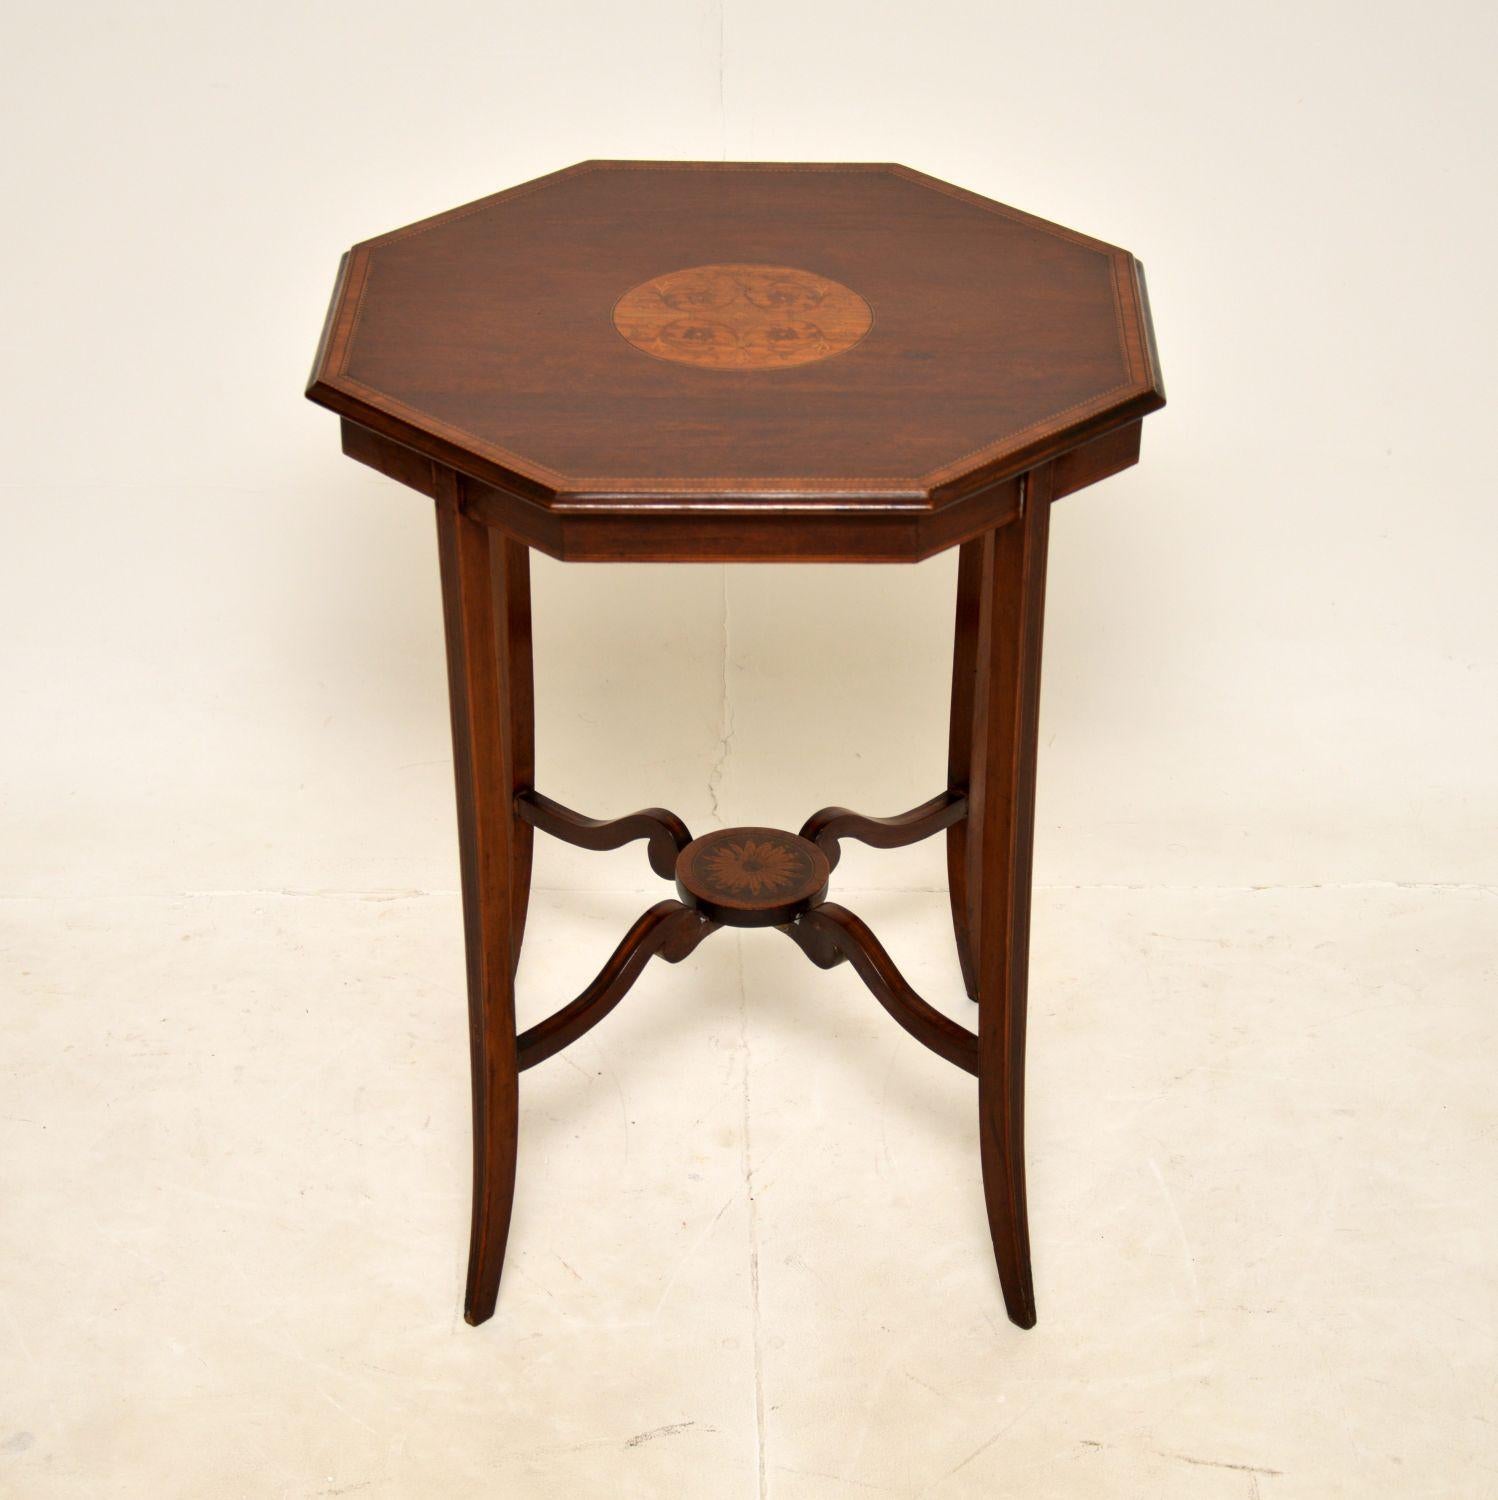 A beautiful and elegant antique occasional side table. This was made in England, it dates from around the 1900-1910 period.

It is of lovely quality, the octagonal top is beautifully cross banded and inlaid with satin wood. This sits on finely